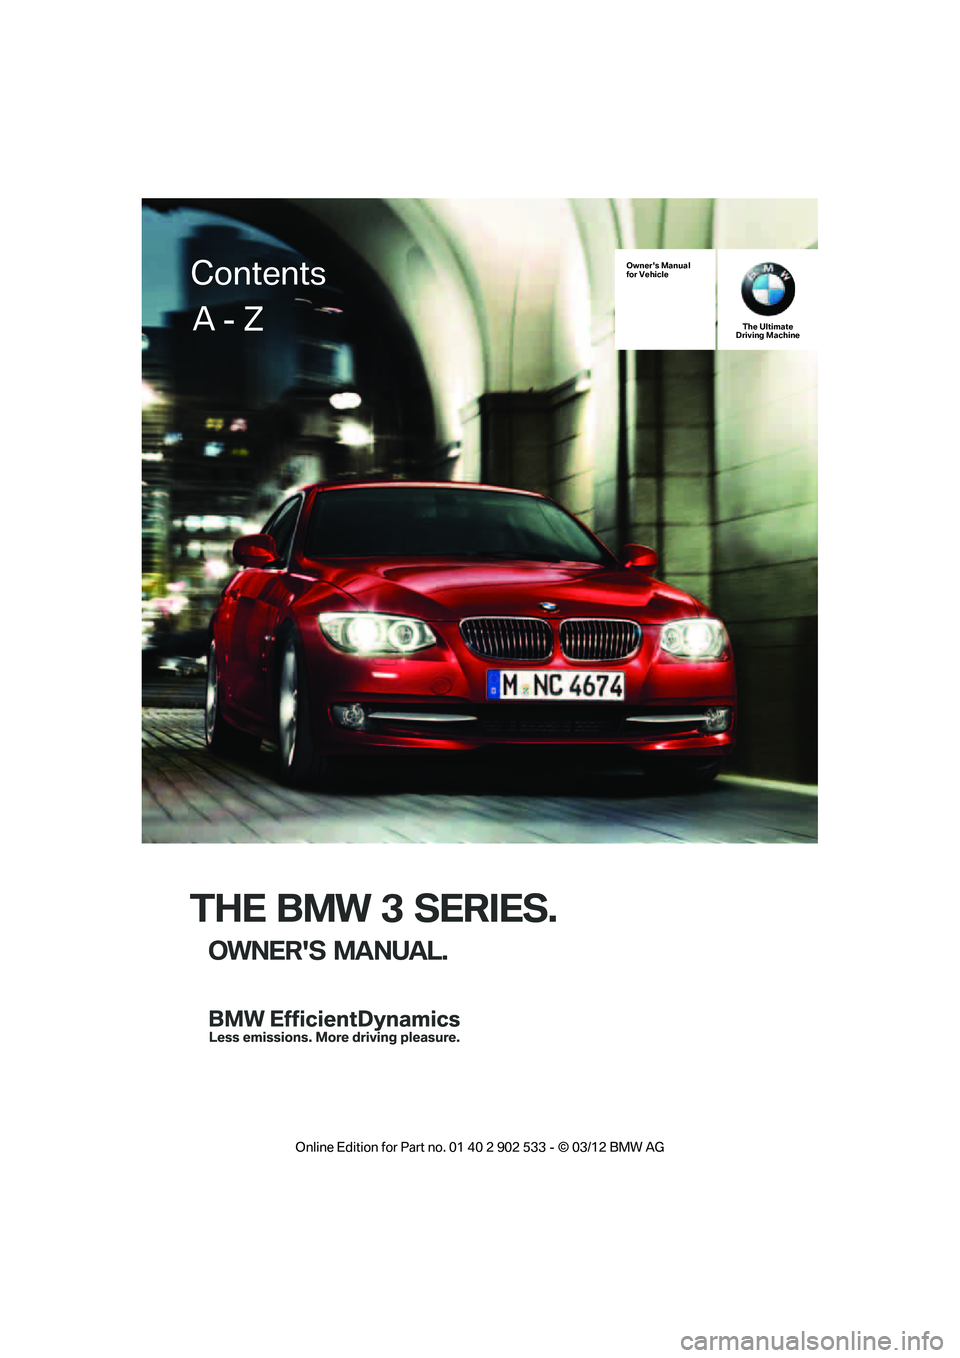 BMW 328I XDRIVE COUPE 2013  Owners Manual THE BMW 3 SERIES.
OWNERS MANUAL.
Owners Manual
for VehicleThe Ultimate
Driving Machine
Contents
A - Z

00320051004F004C00510048000300280047004C0057004C005200510003  